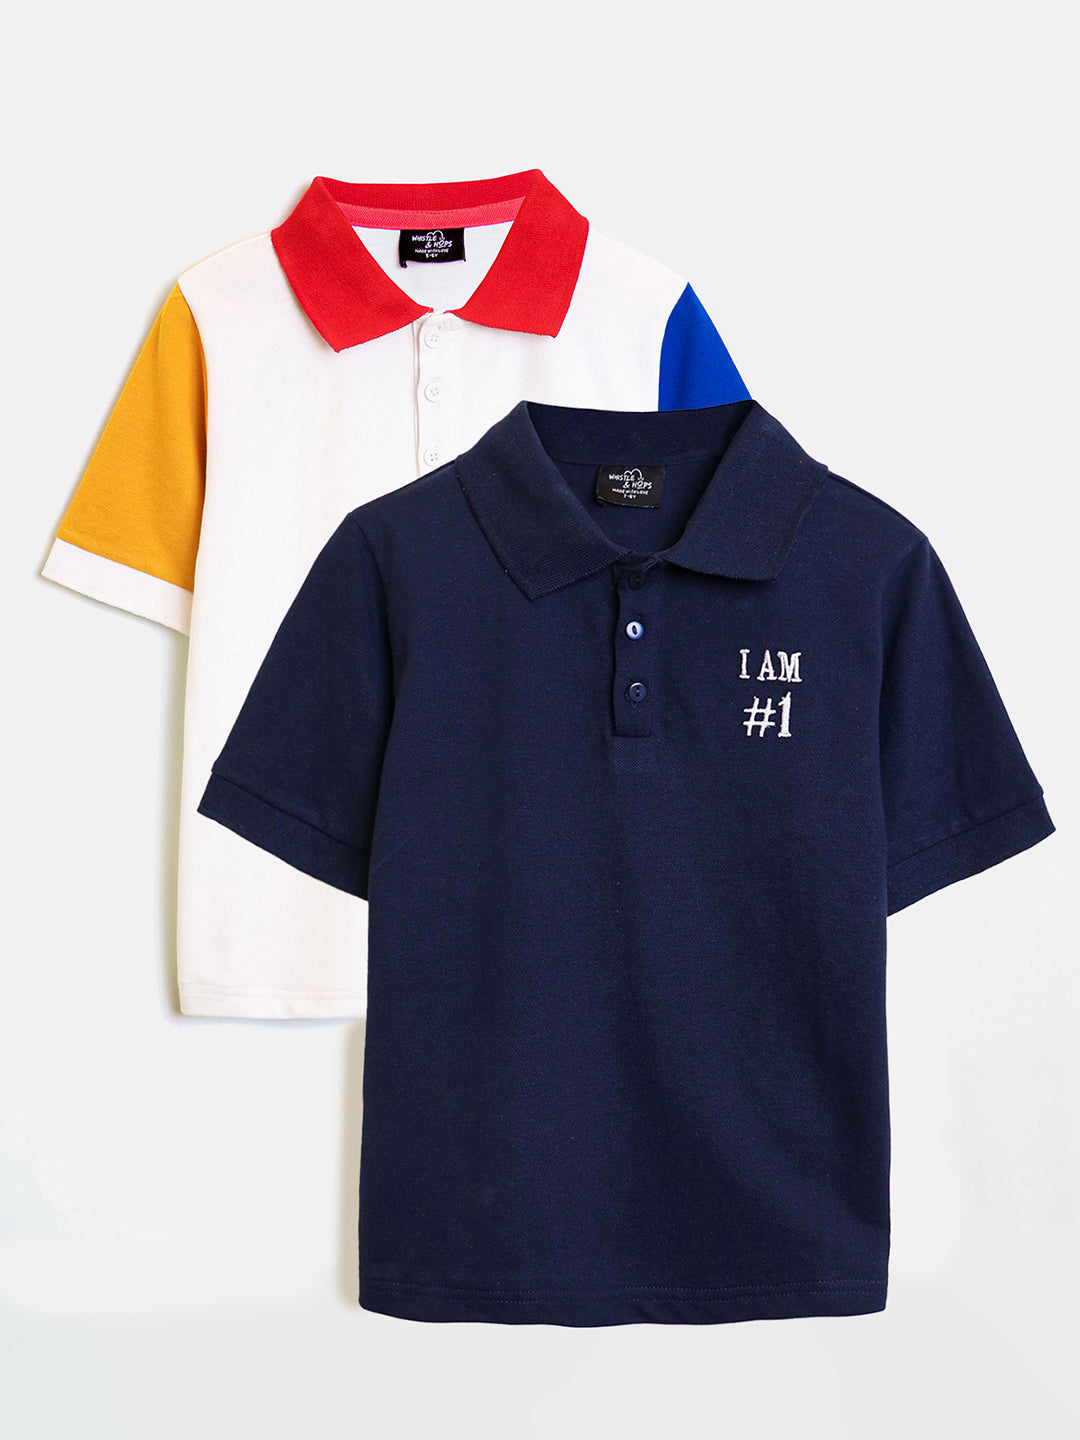 Embroidered Polo T-shirts Combo- Navy Blue and White